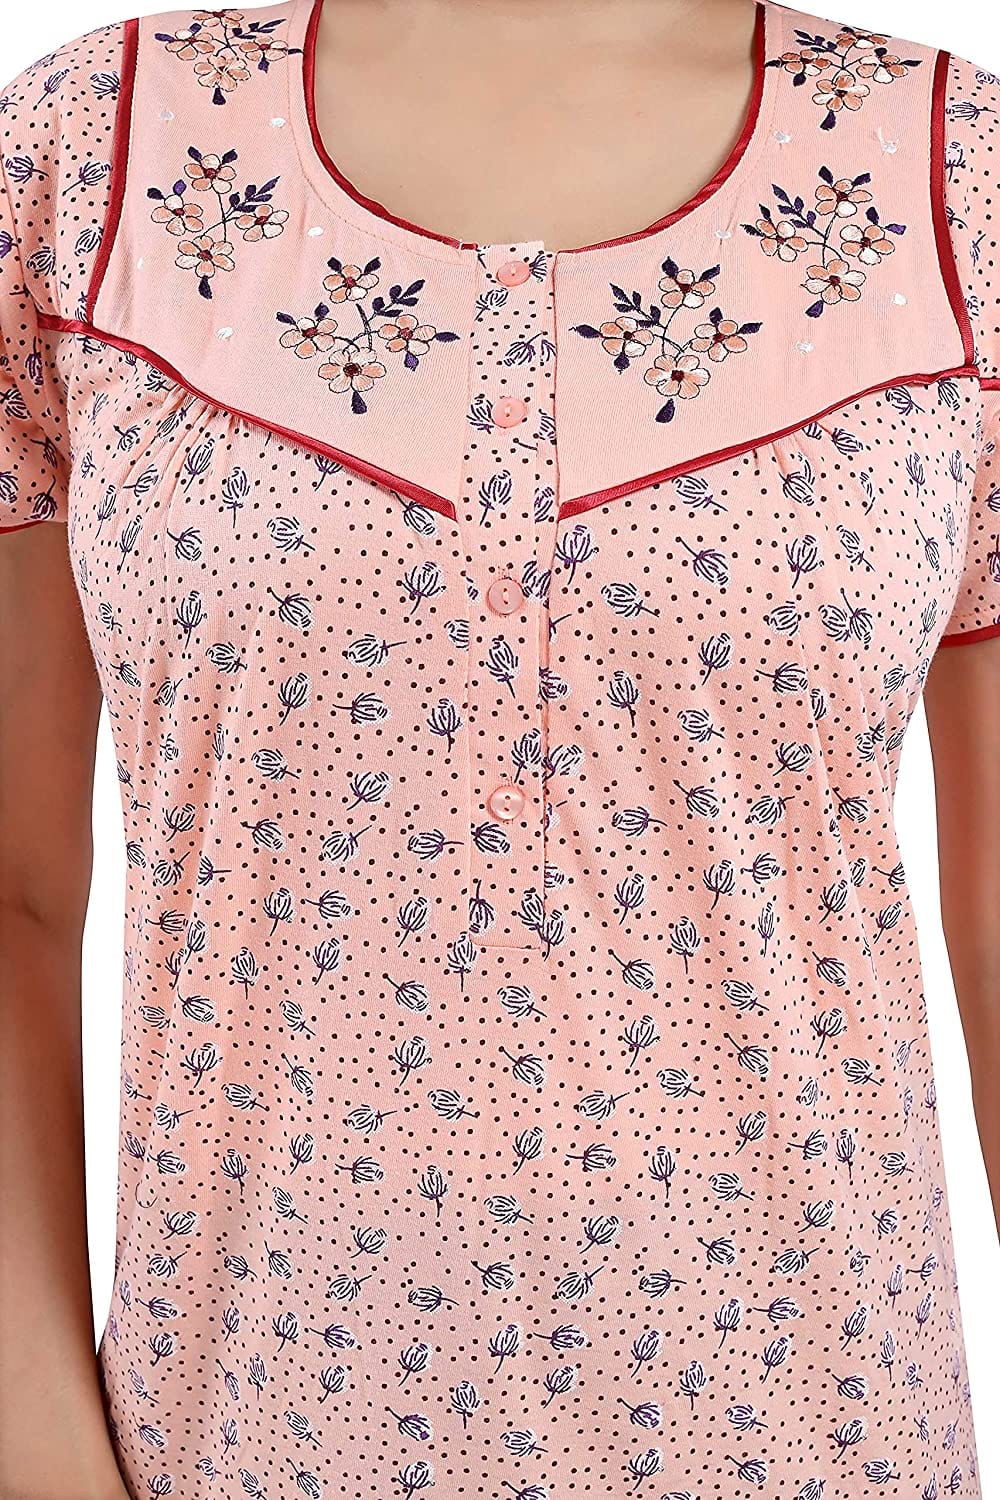 Skkinvalue's long nighty for women with embroidery on the neck